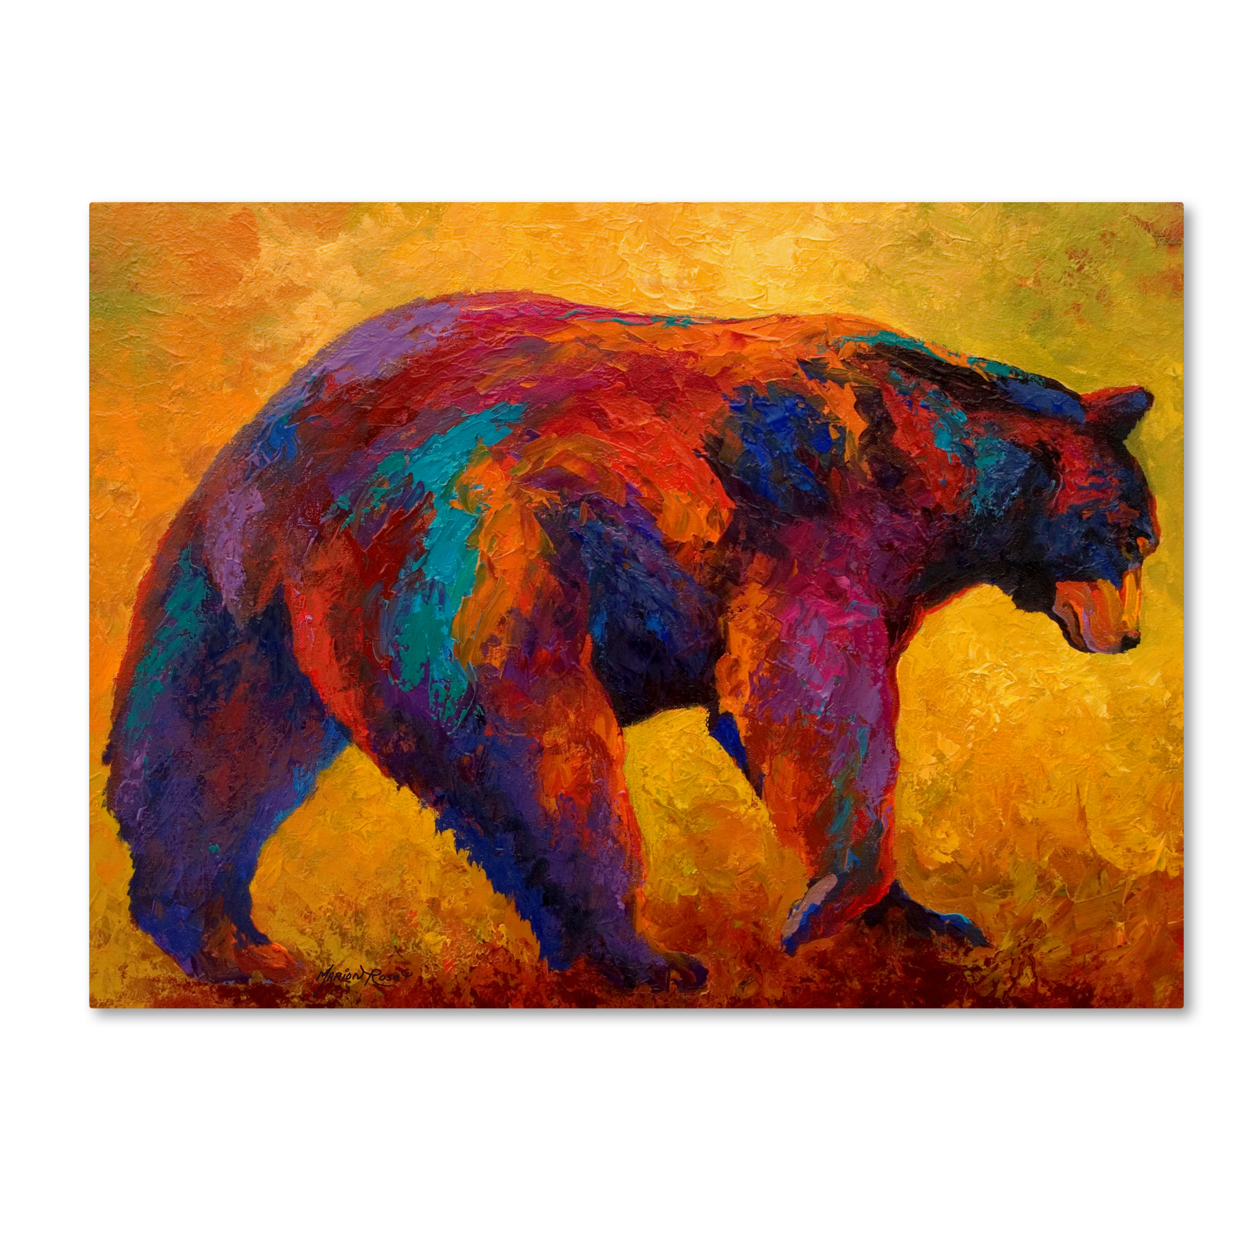 Marion Rose 'Daily Rounds Black Bear' Ready To Hang Canvas Art 24 X 32 Inches Made In USA